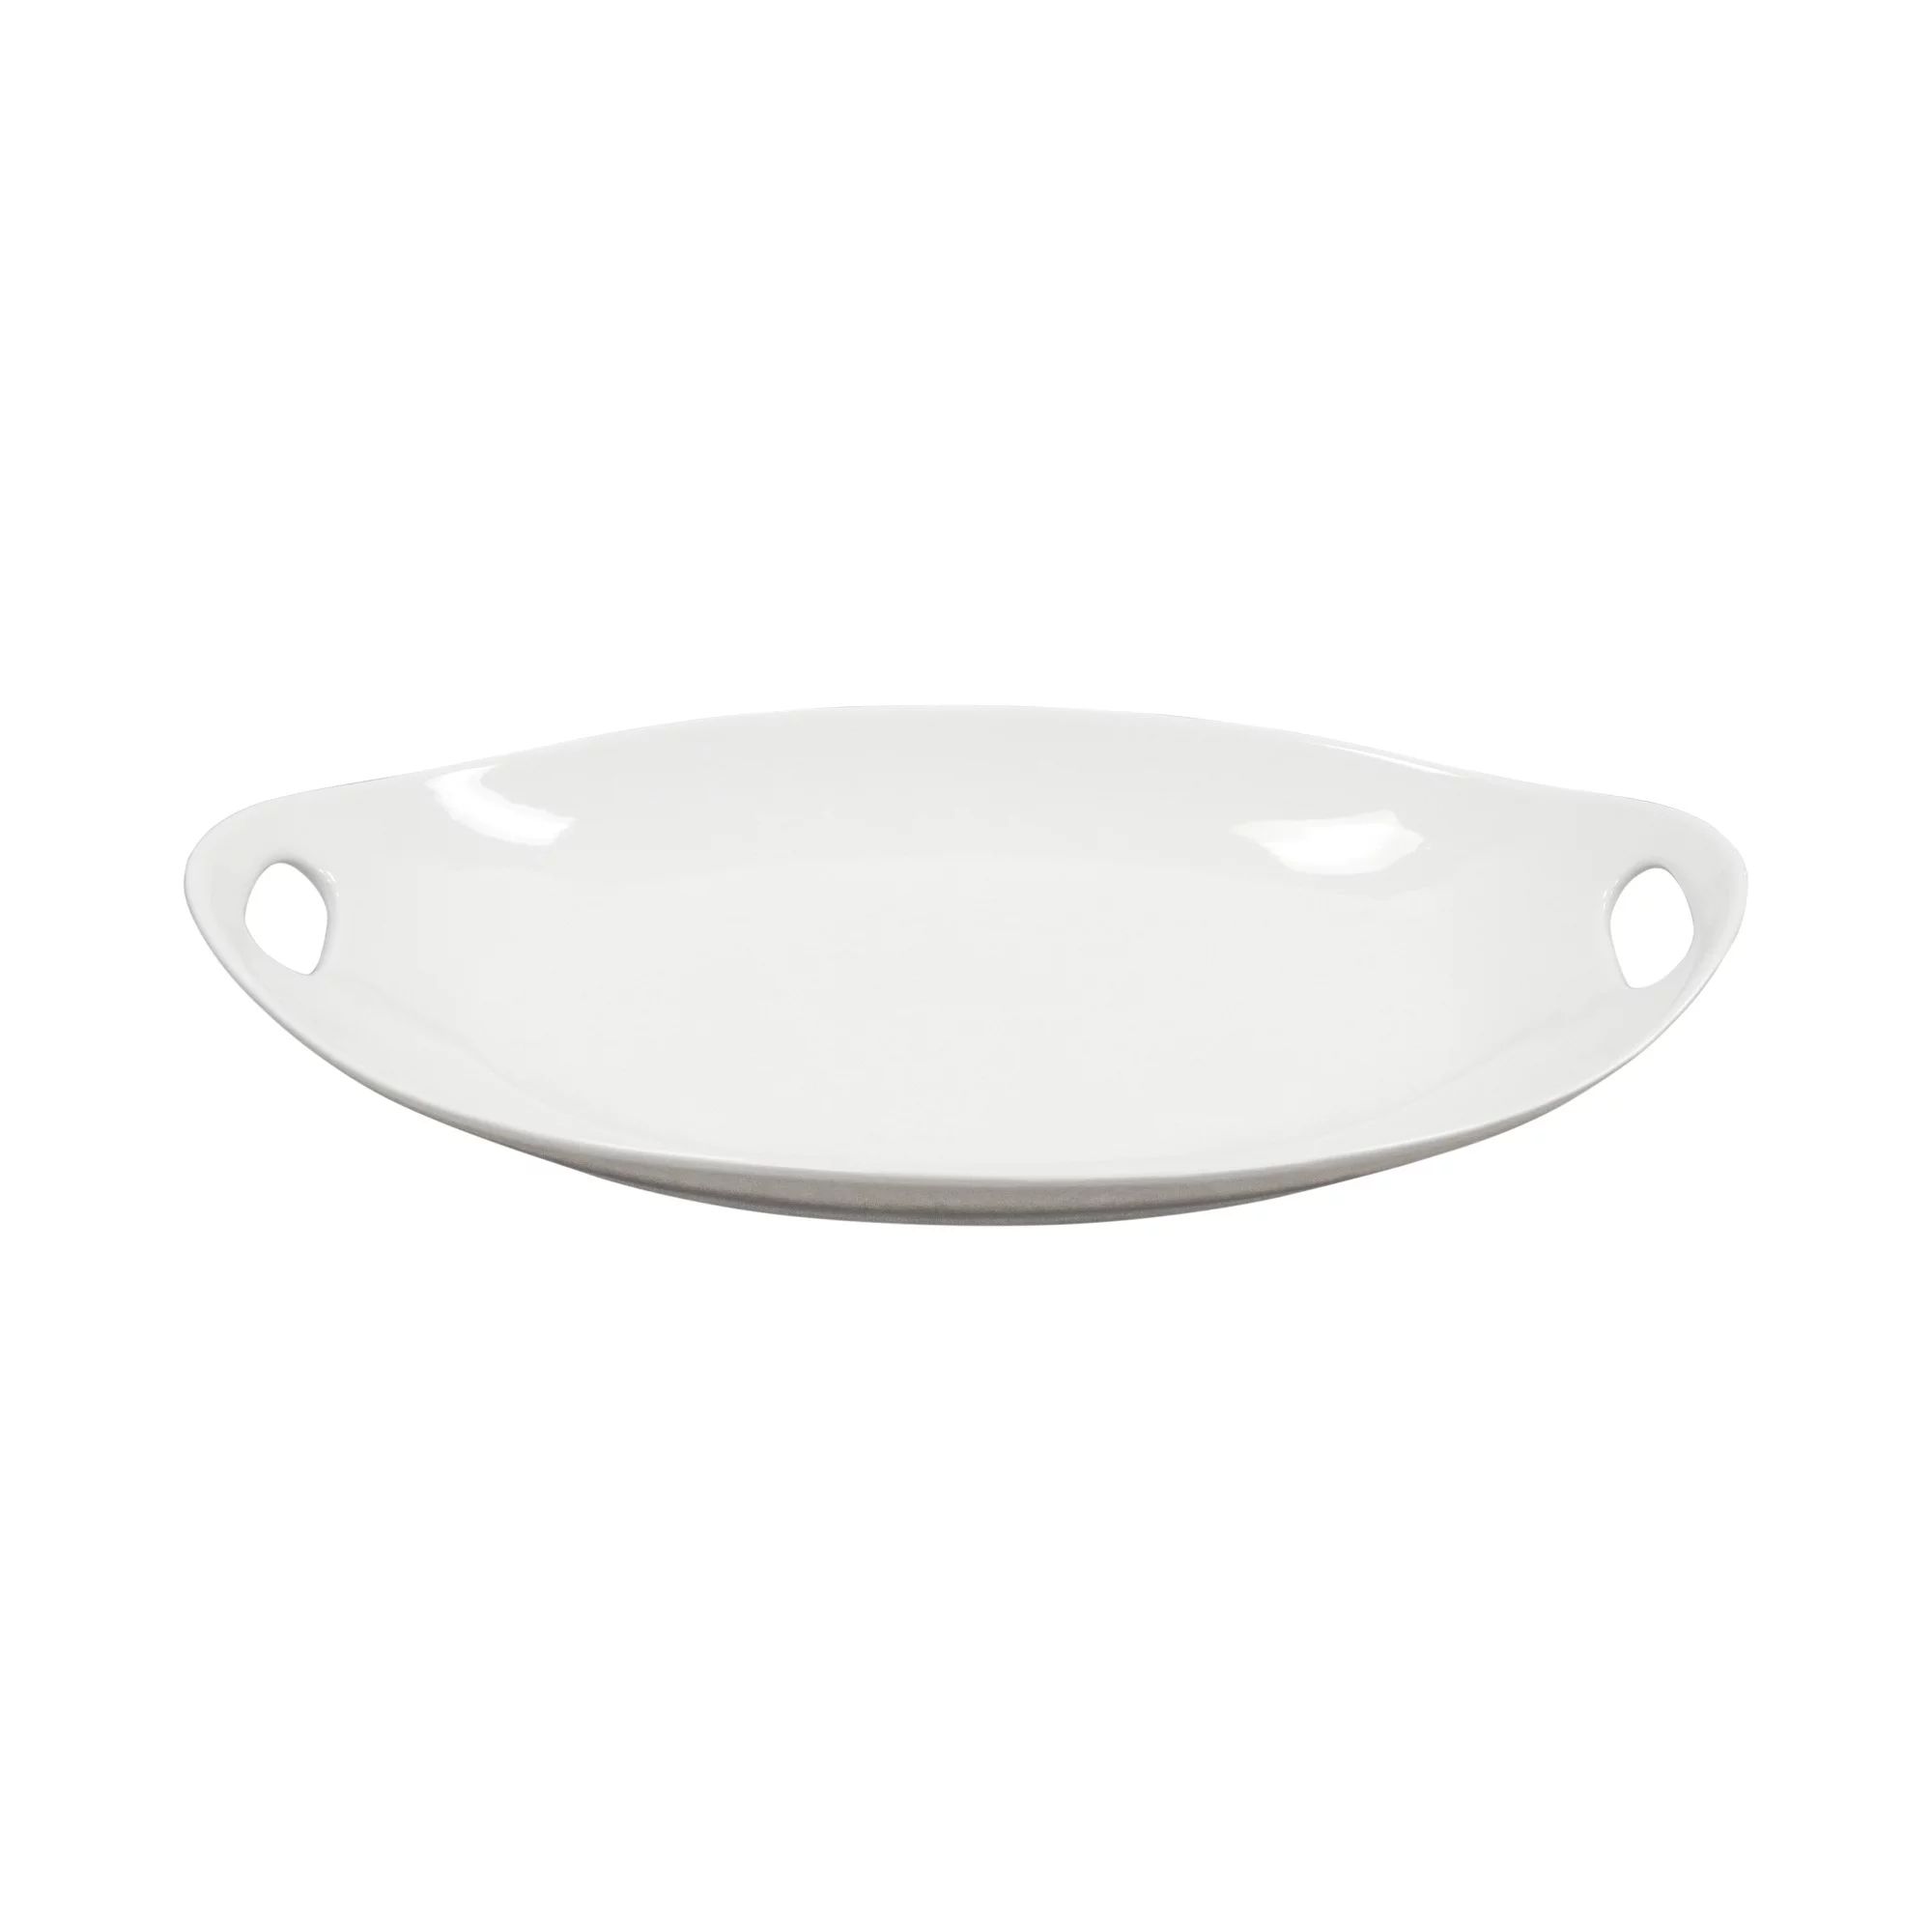 Better Homes & Gardens White Porcelain Tray with Handles | Walmart (US)